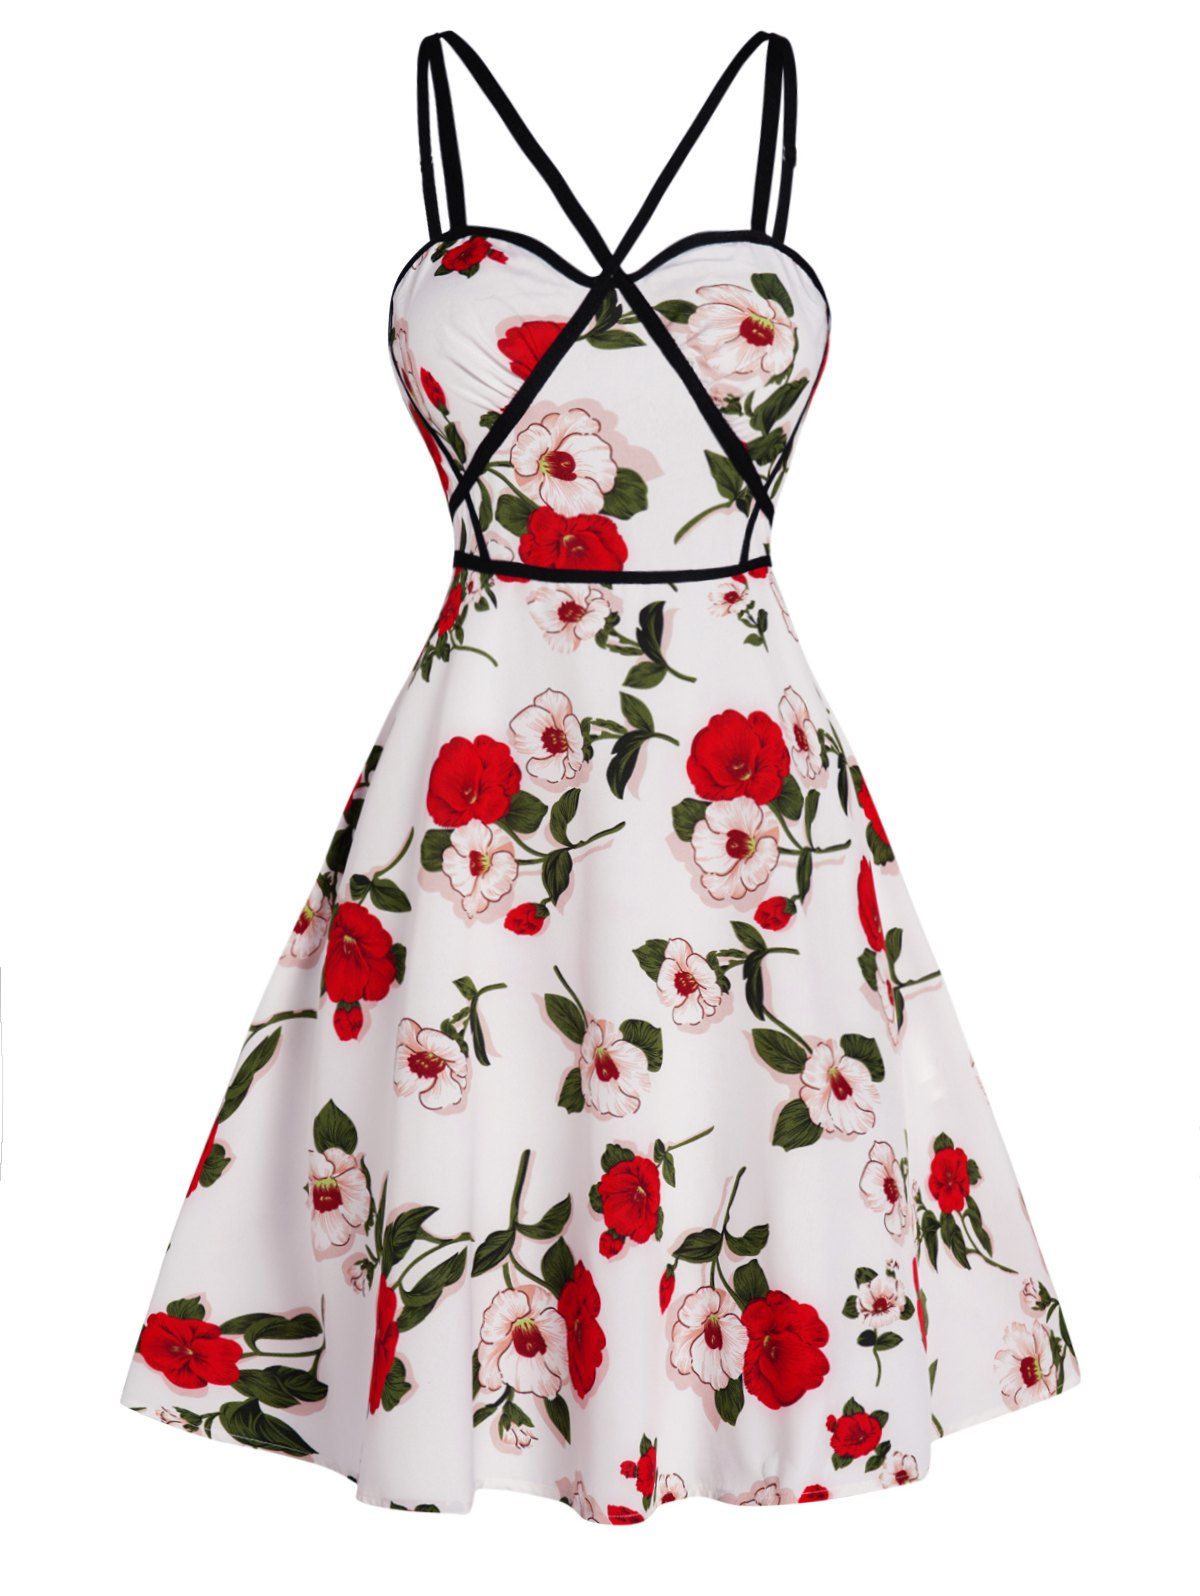 Flower Print Mini Sundress Contrast Piping Crossover Adjustable Strap A Line Dress - WHITE XXL